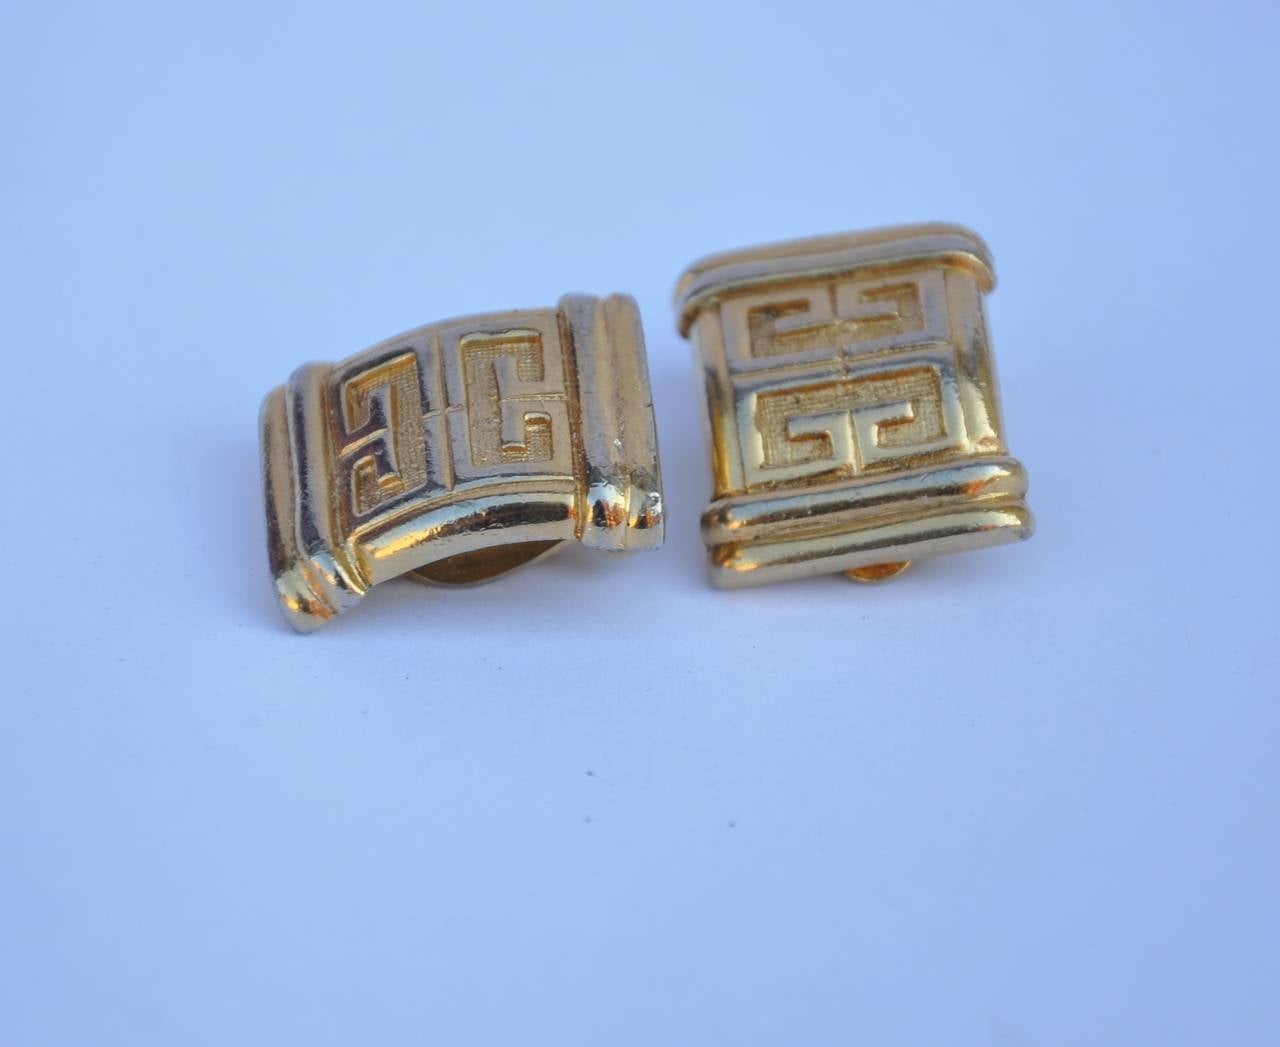 Givenchy signature gold vermeil ear clips with his signature logo measures 1" in height, 1/2" in width and 2/8" in depth. Earrings are signed.